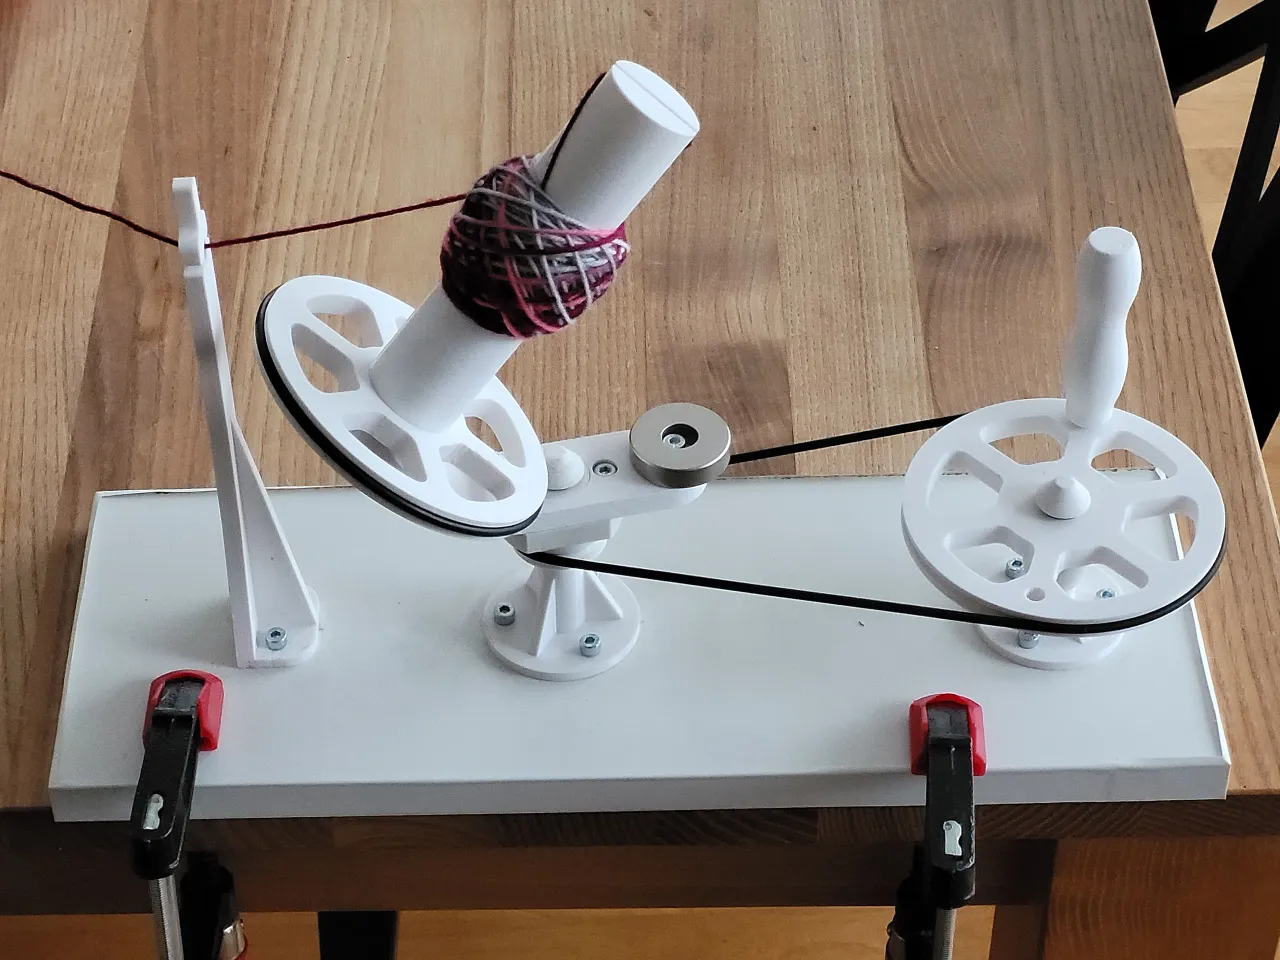 How to Use a Yarn Ball Winder to Make Yarn Cakes